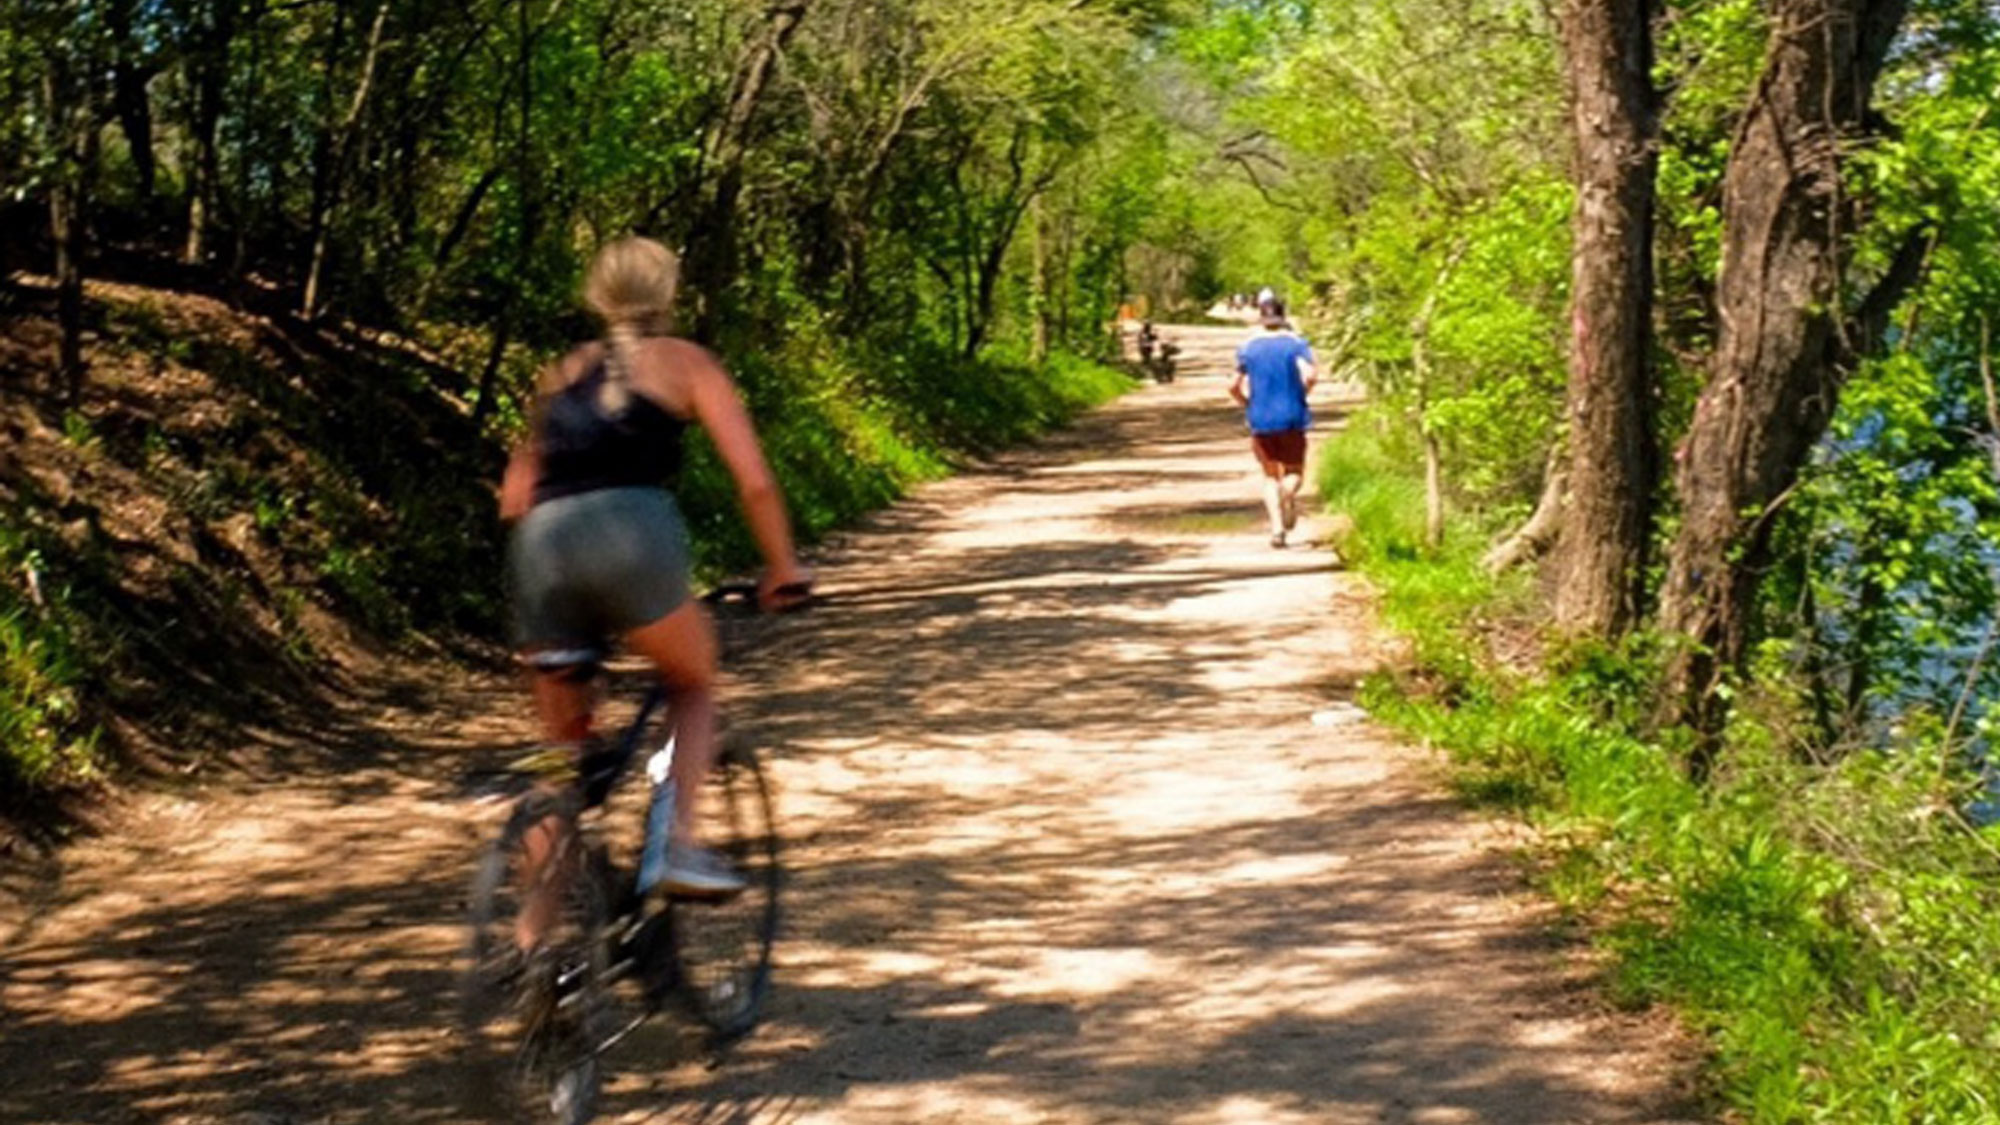 People running and biking on an outdoor recreation trail